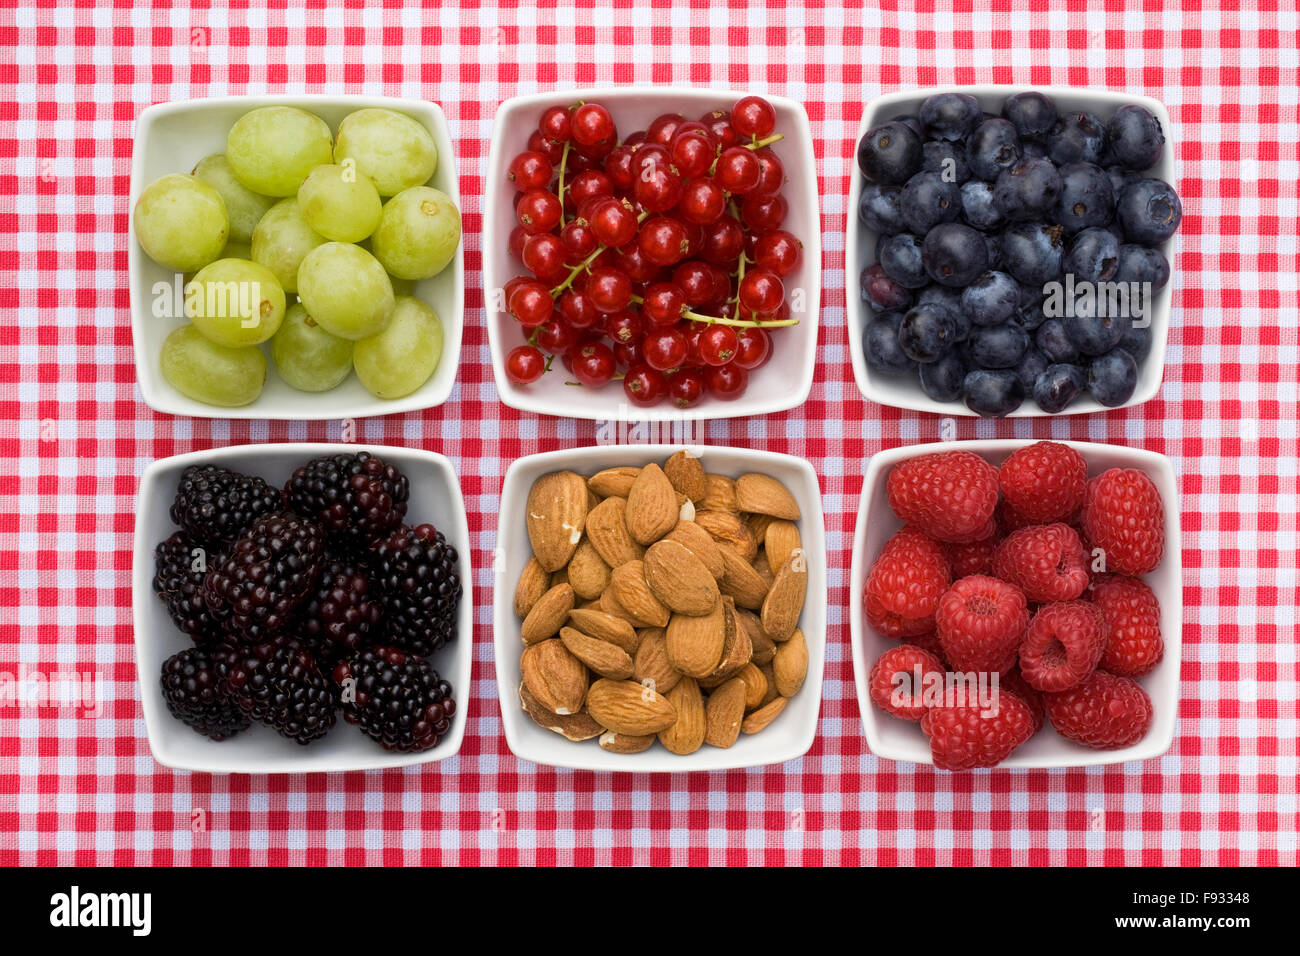 Redcurrants, Grapes, Blackberries, Almonds, Raspberries and Blueberries in white bowls on a checked background. Stock Photo